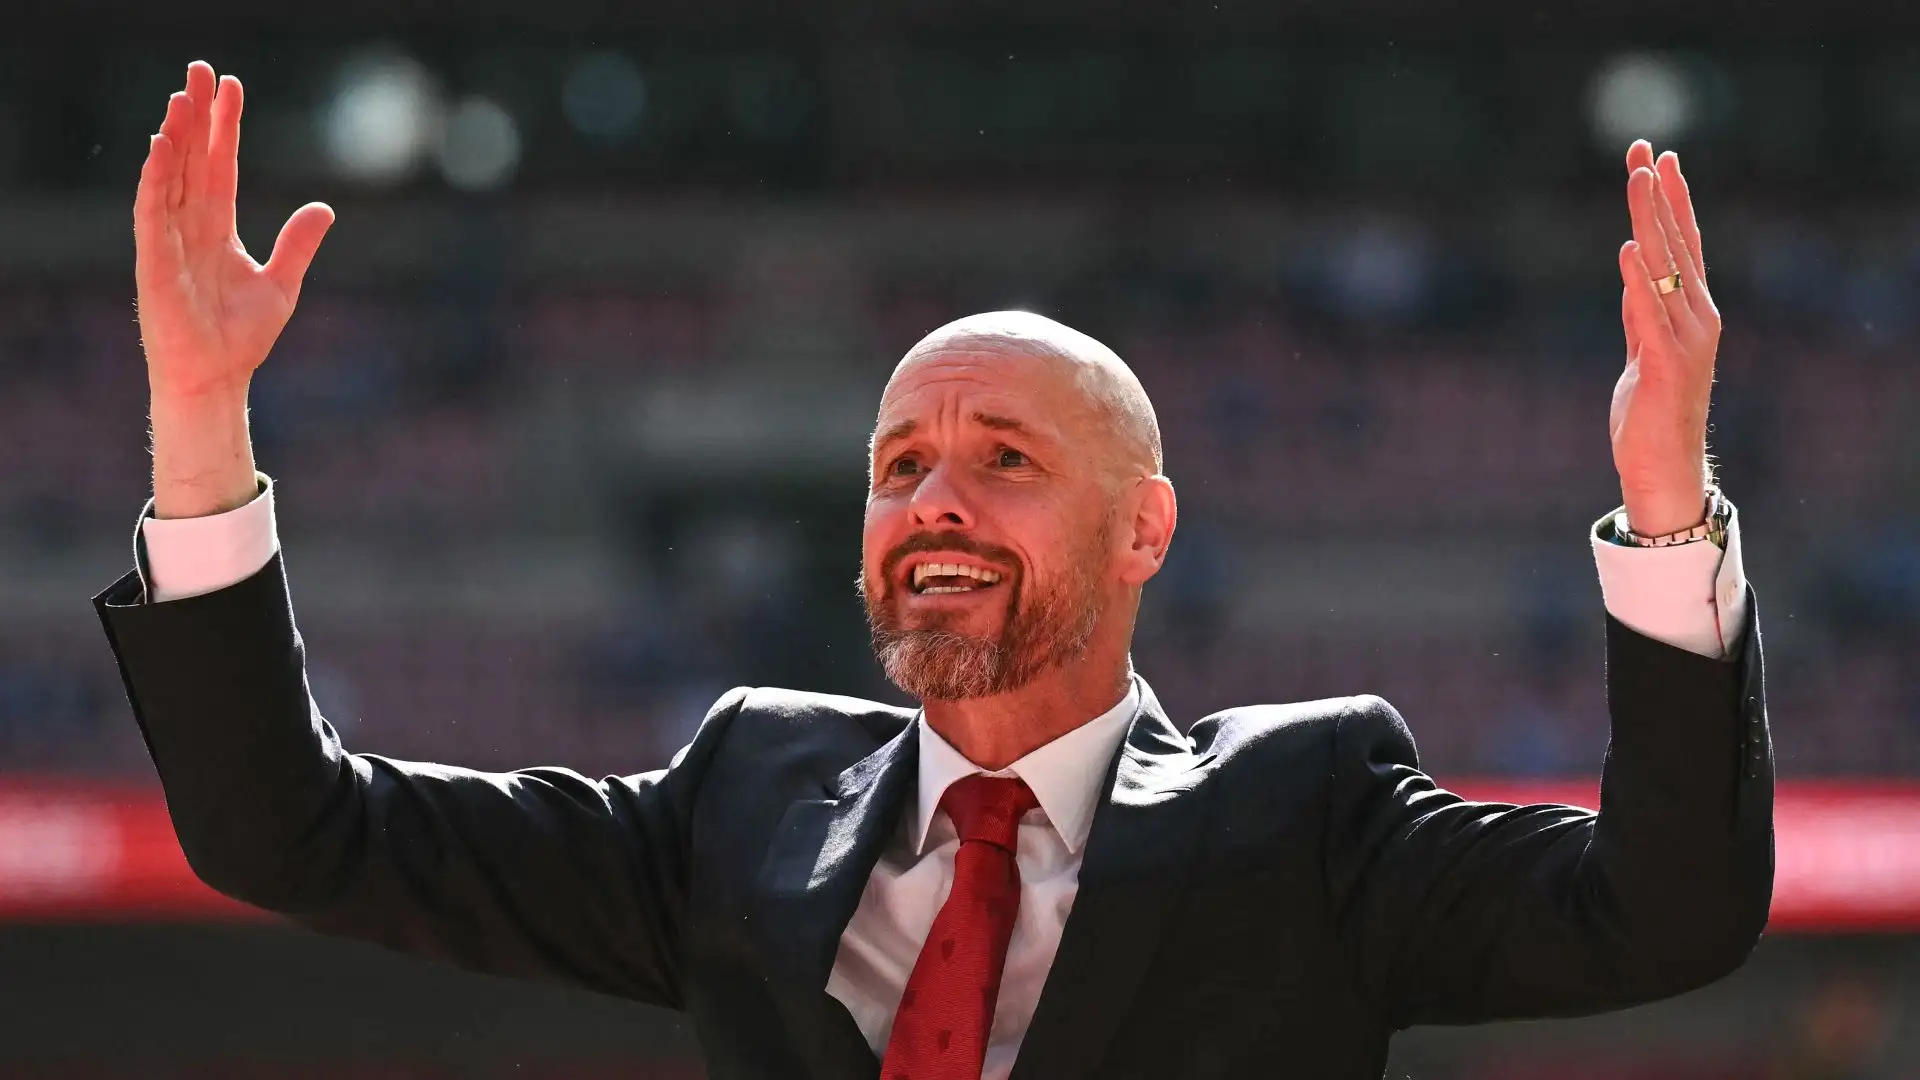 Revealed: Erik ten Hag's three demands before he agrees to sign new Man Utd contract - including key decision on Jadon Sancho's future